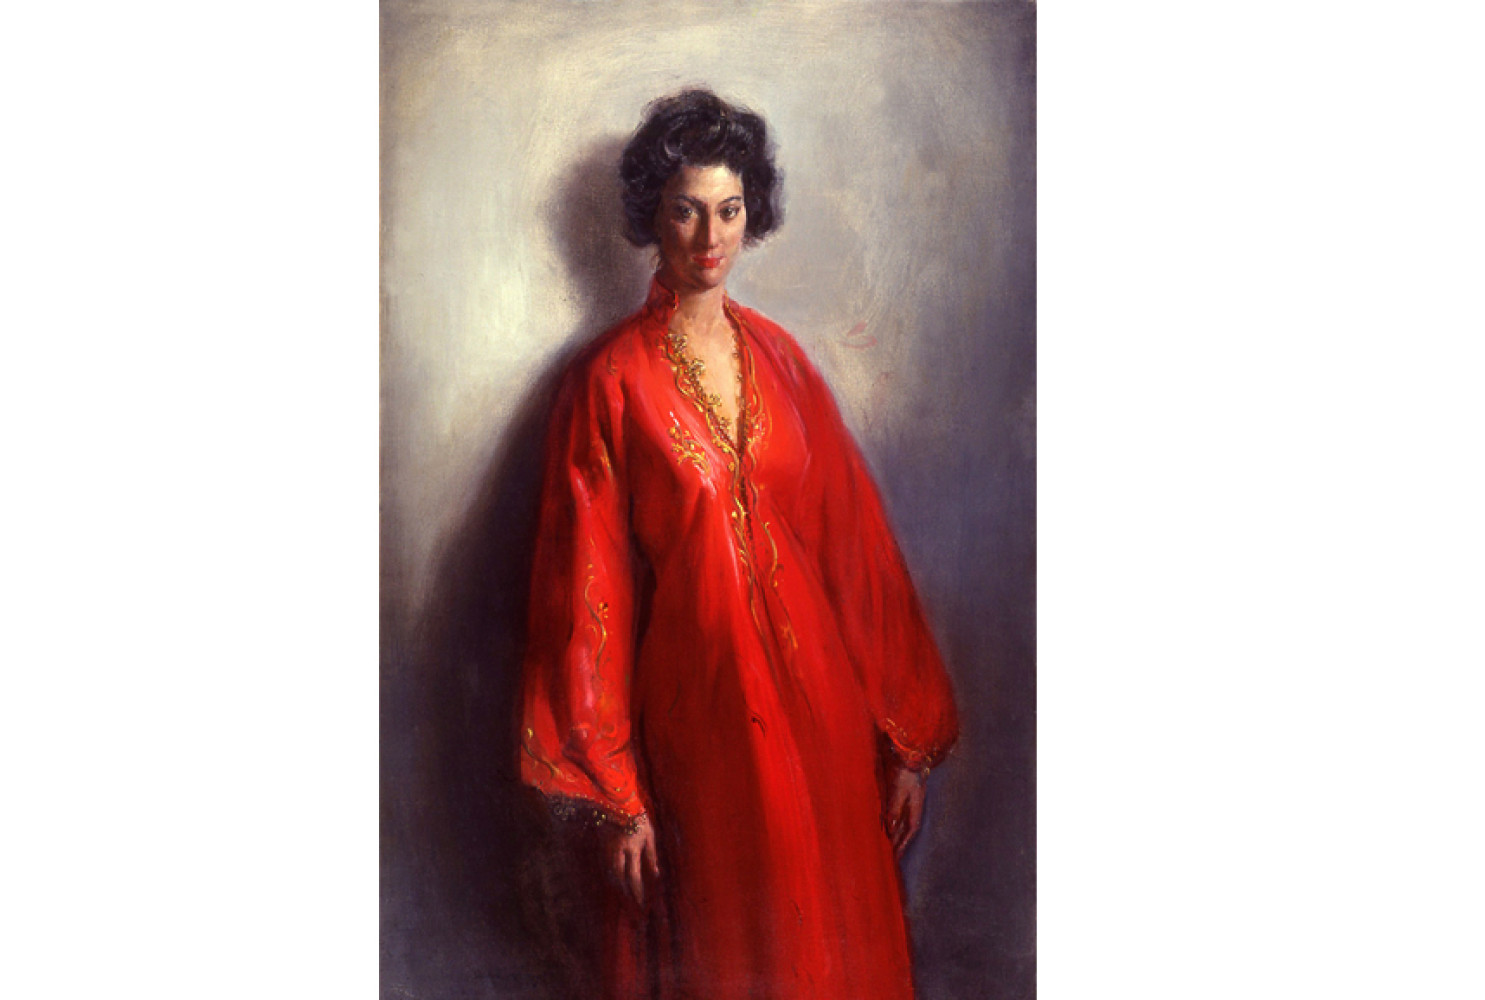 Susan in Costume, 1959, By Frank Mason (American, 1921—2009); Oil on canvas; 59 x 37 inches; Courtesy of the Estate of Frank Mason; P078